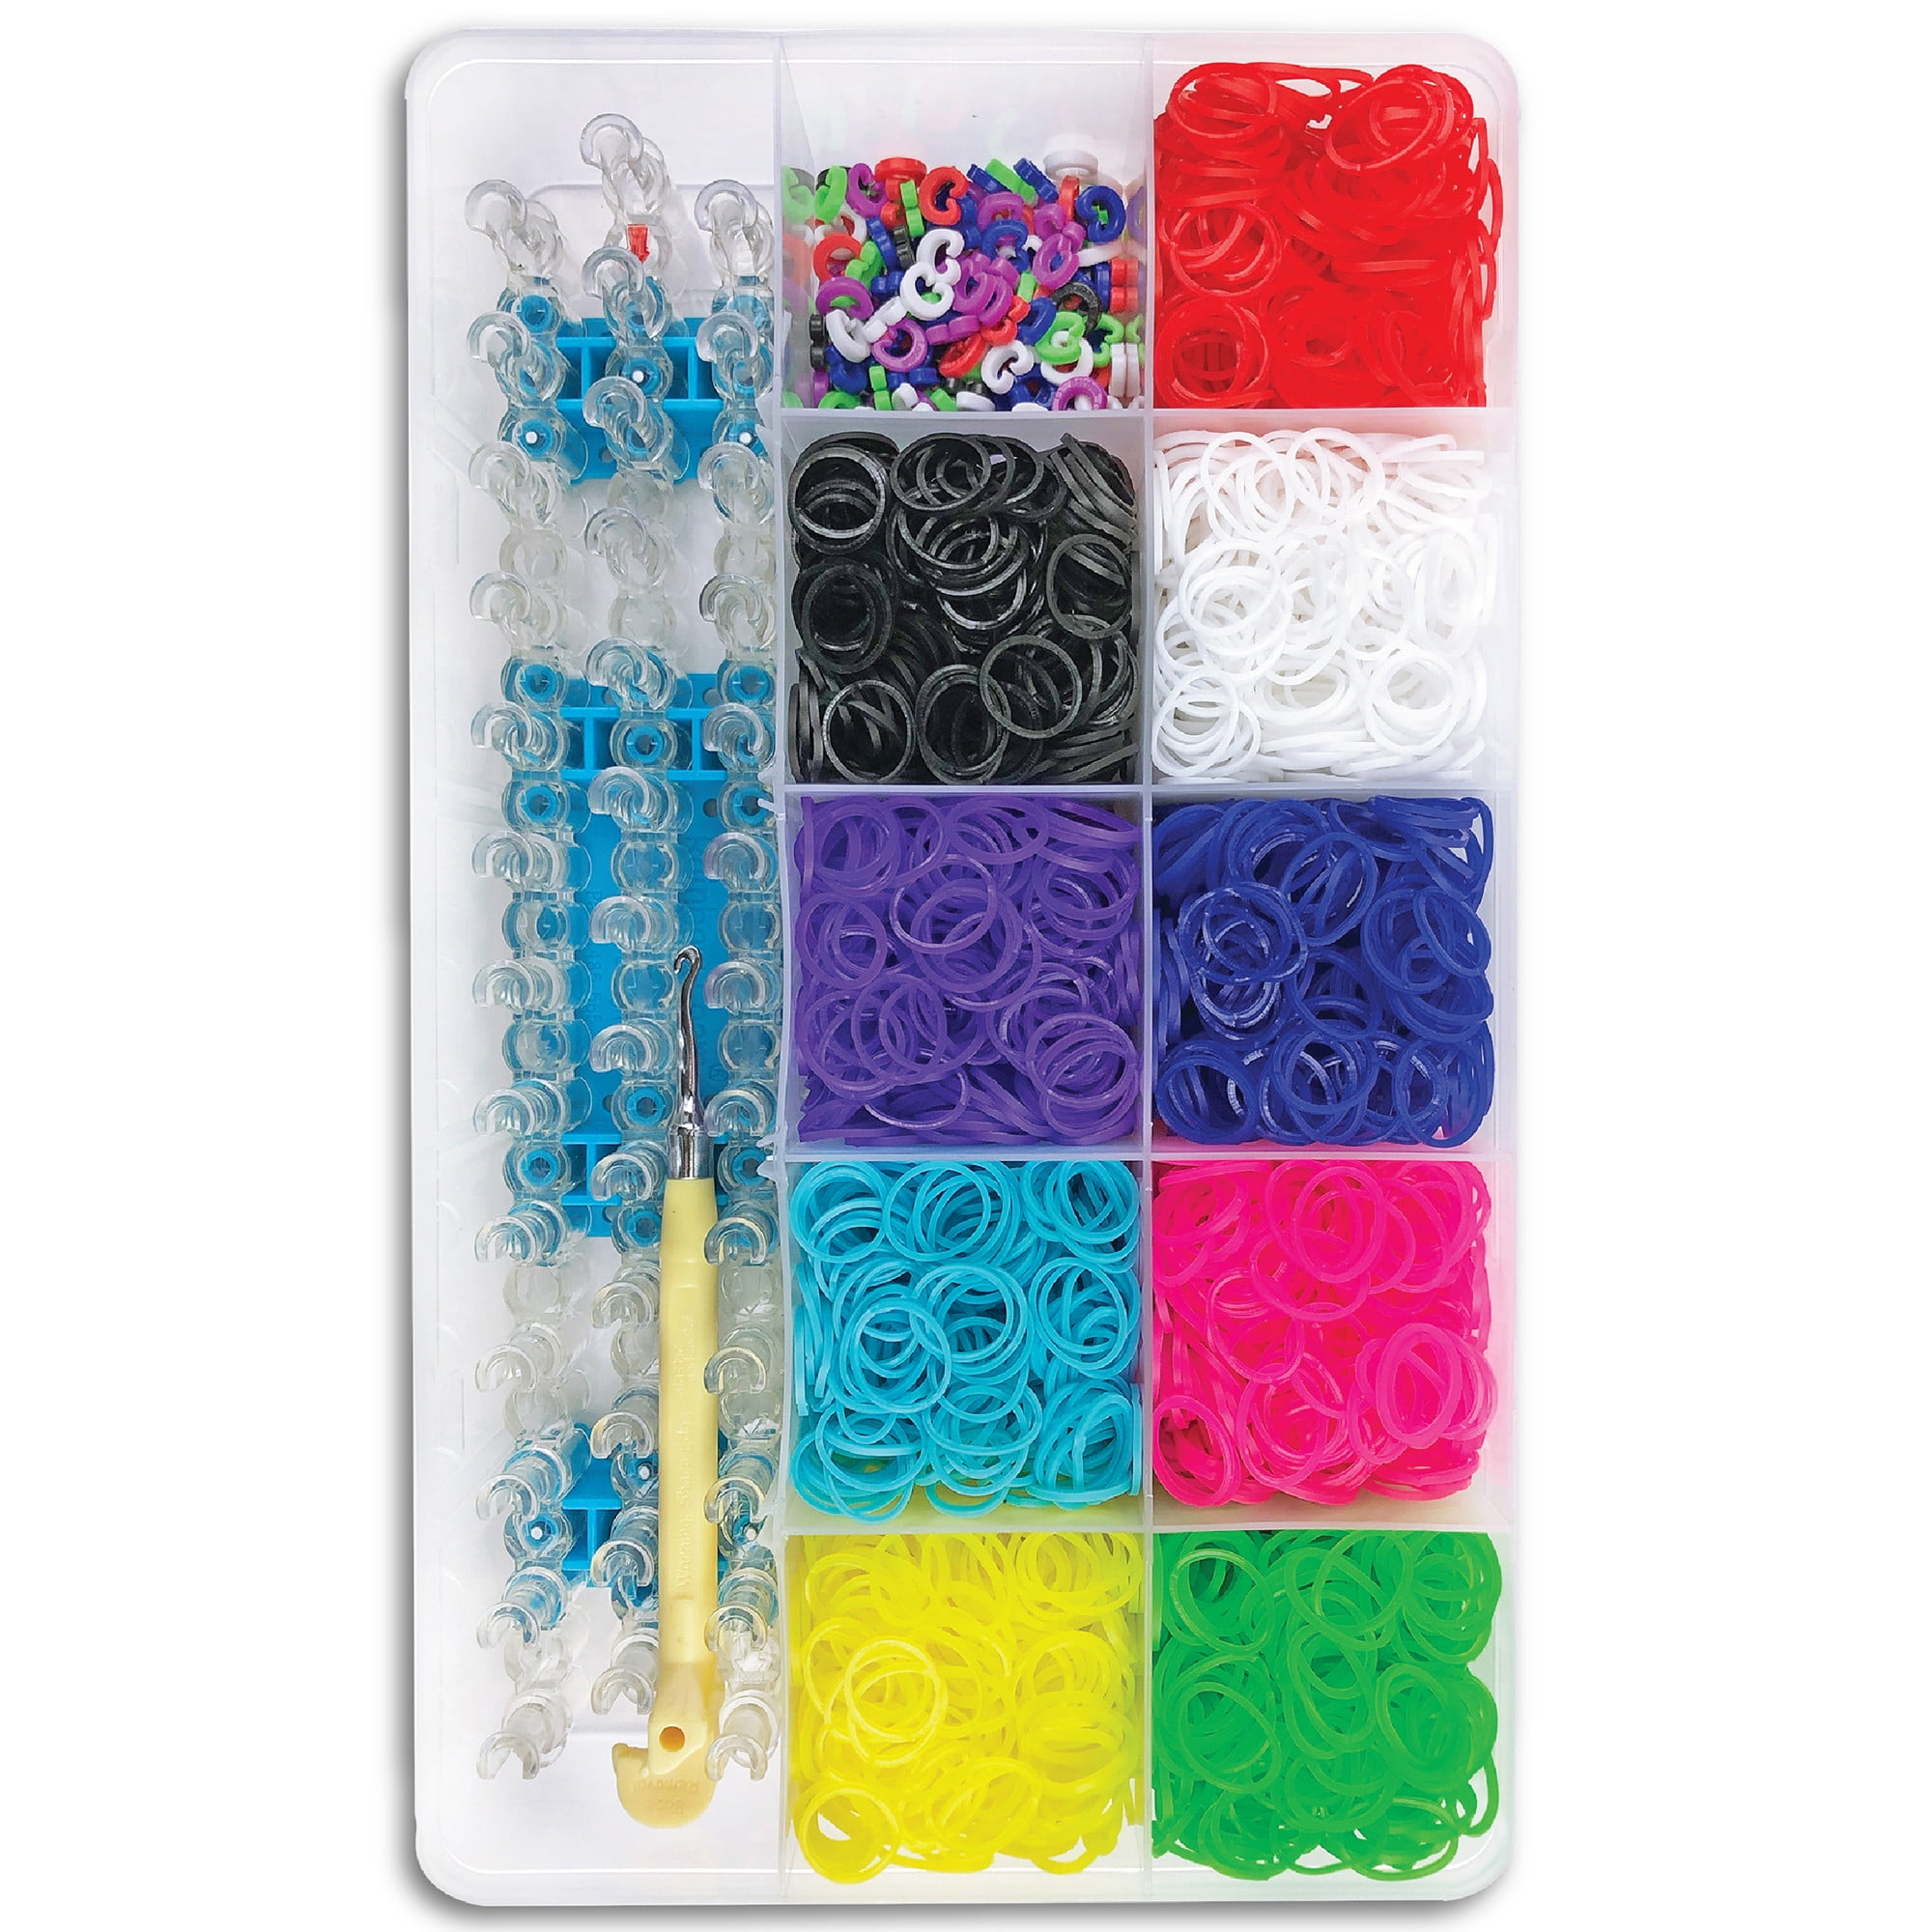 Rainbow Loom® Combo Set, Features 4000+ Colorful Rubber Bands, 2  Step-by-Step Bracelet Instructions, Organizer Case, Great Gift for Kids 7+  to Promote